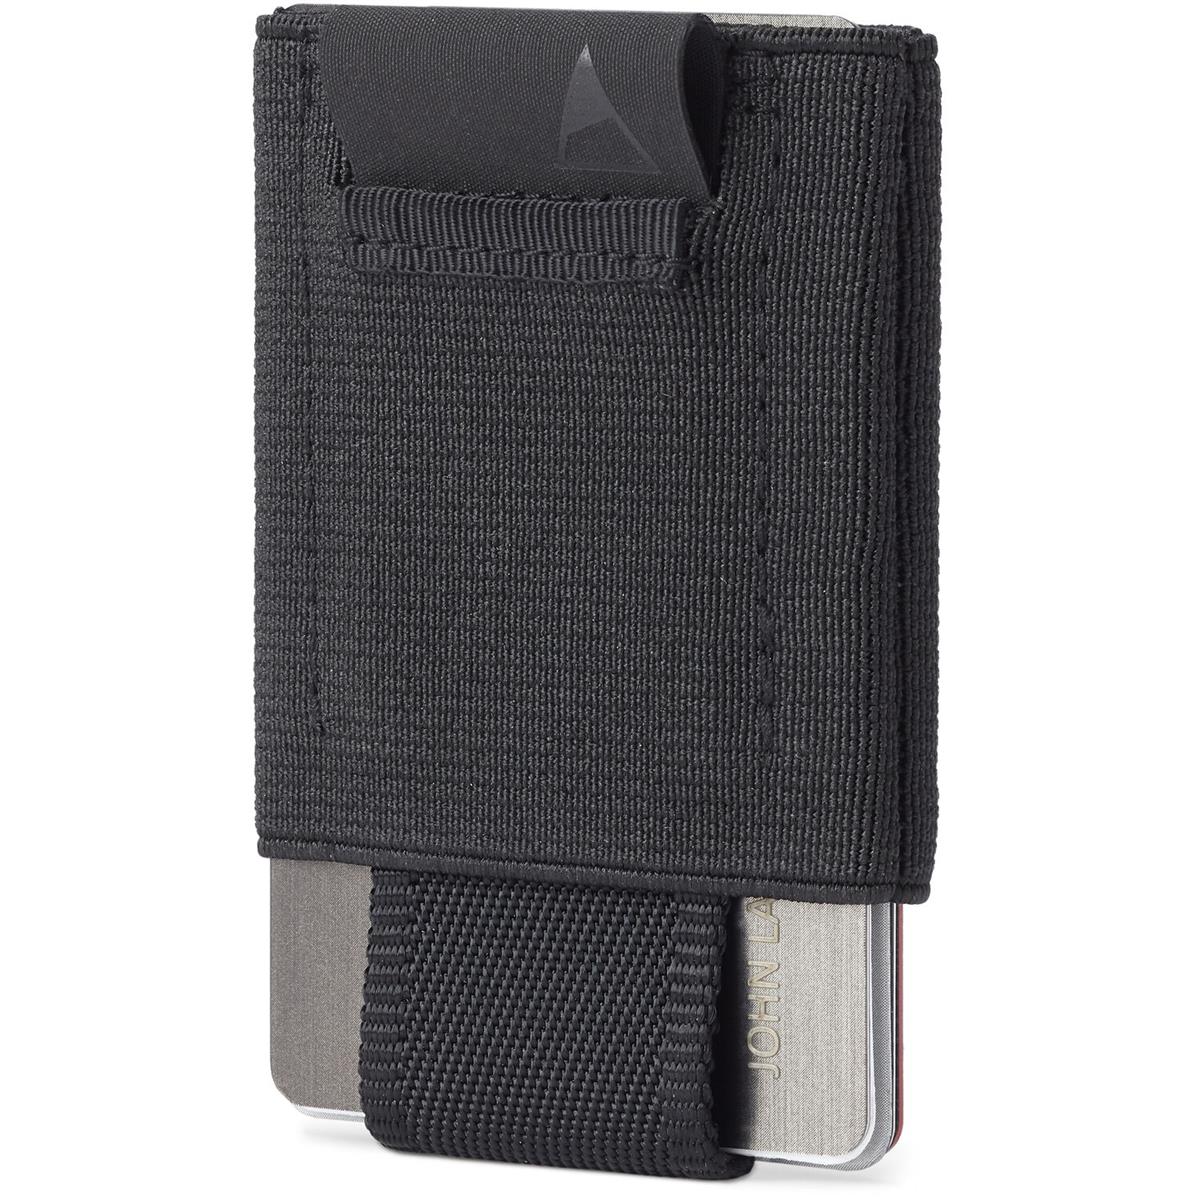 Image of Nomatic Black Wallet with Black Tab